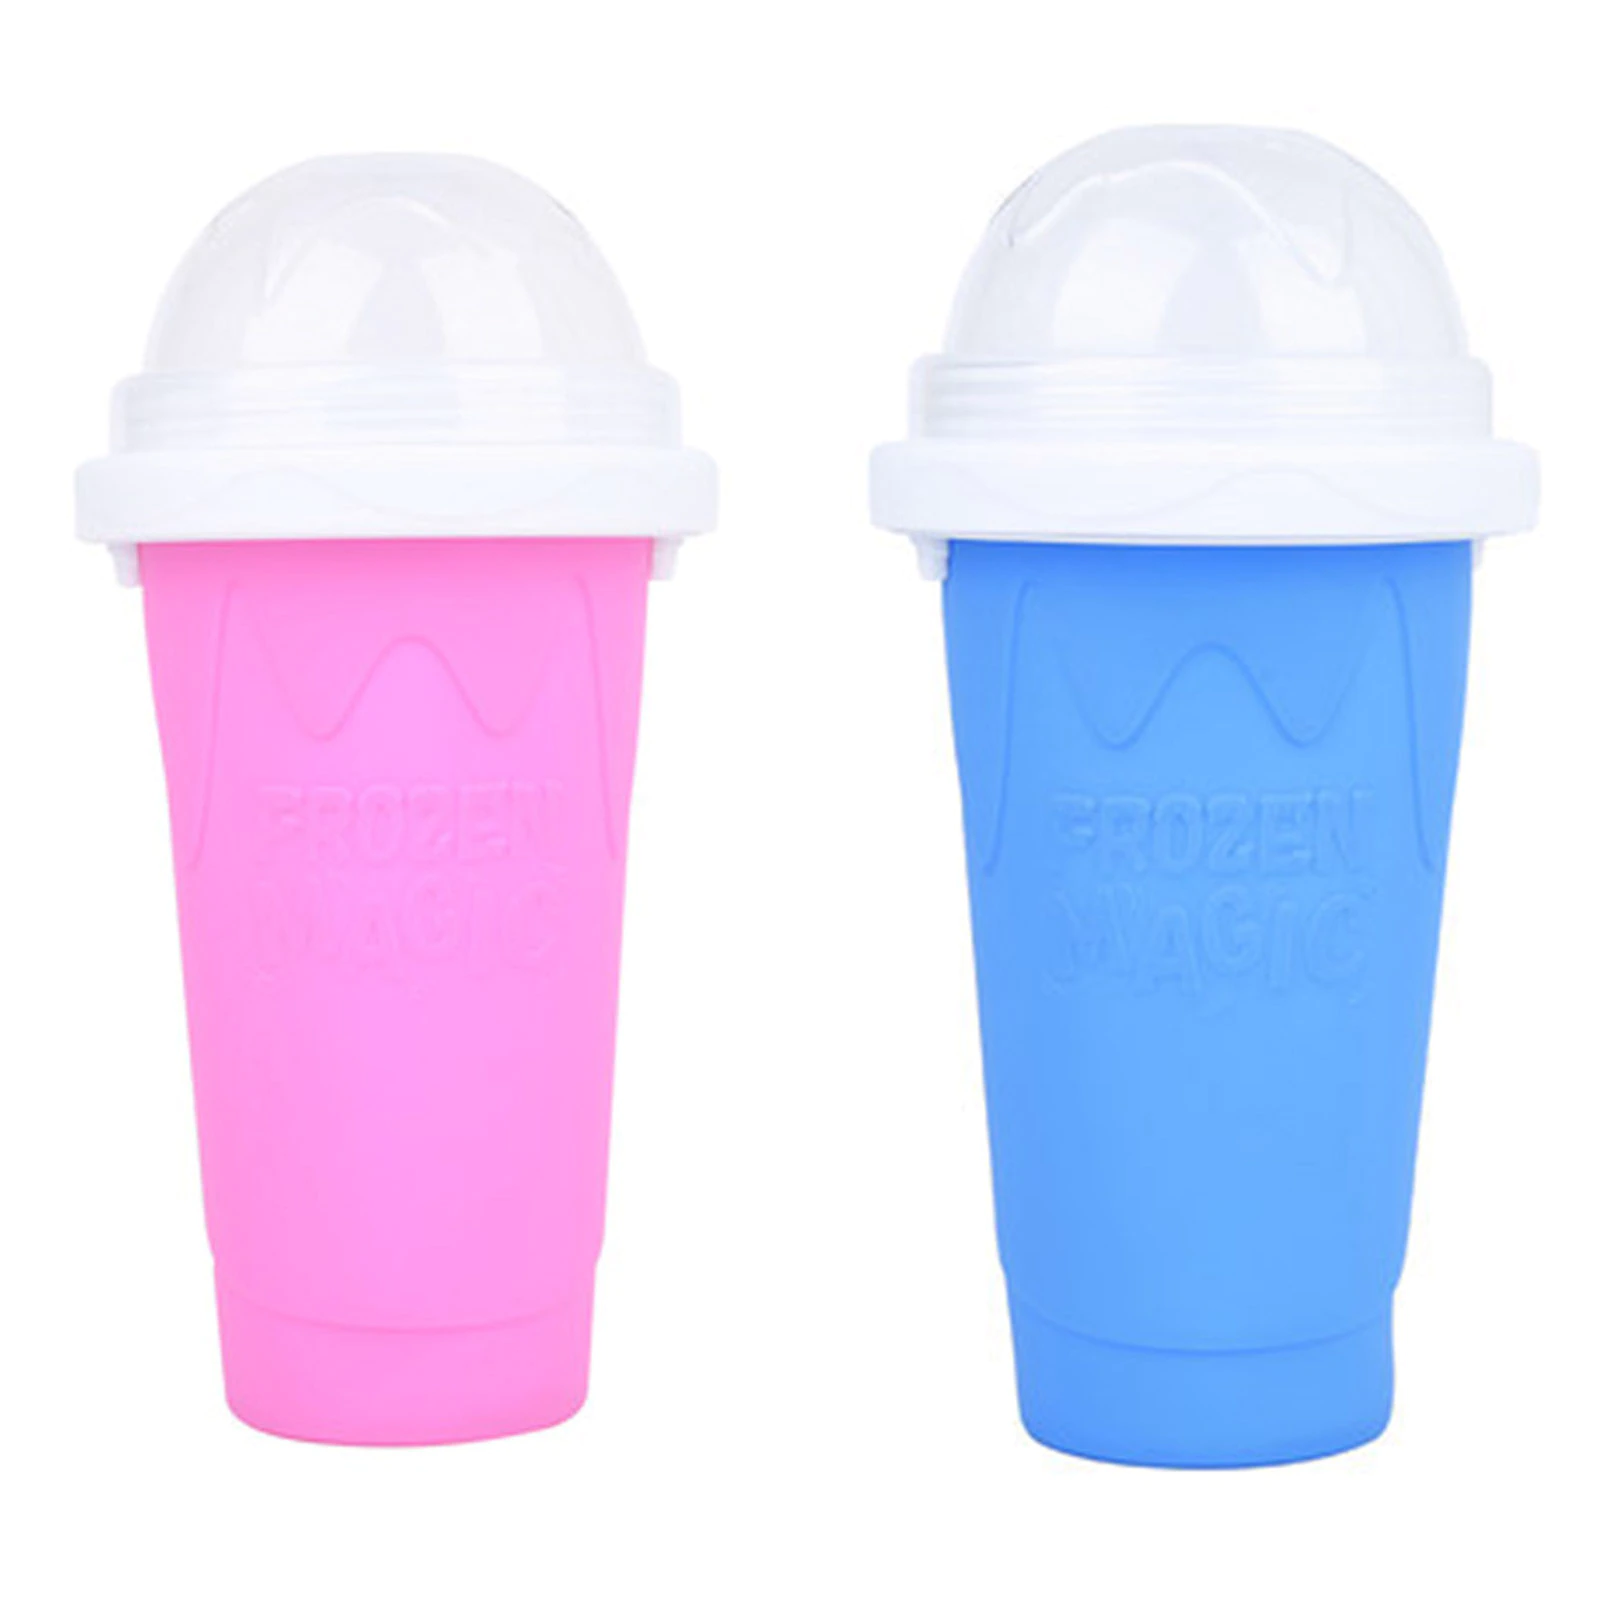 Smoothie Cup Pinch Cups Frozen Magic Squeeze Cup Cooling Maker Cup Freeze Mug Milkshake Tools Protable Smoothie Mug